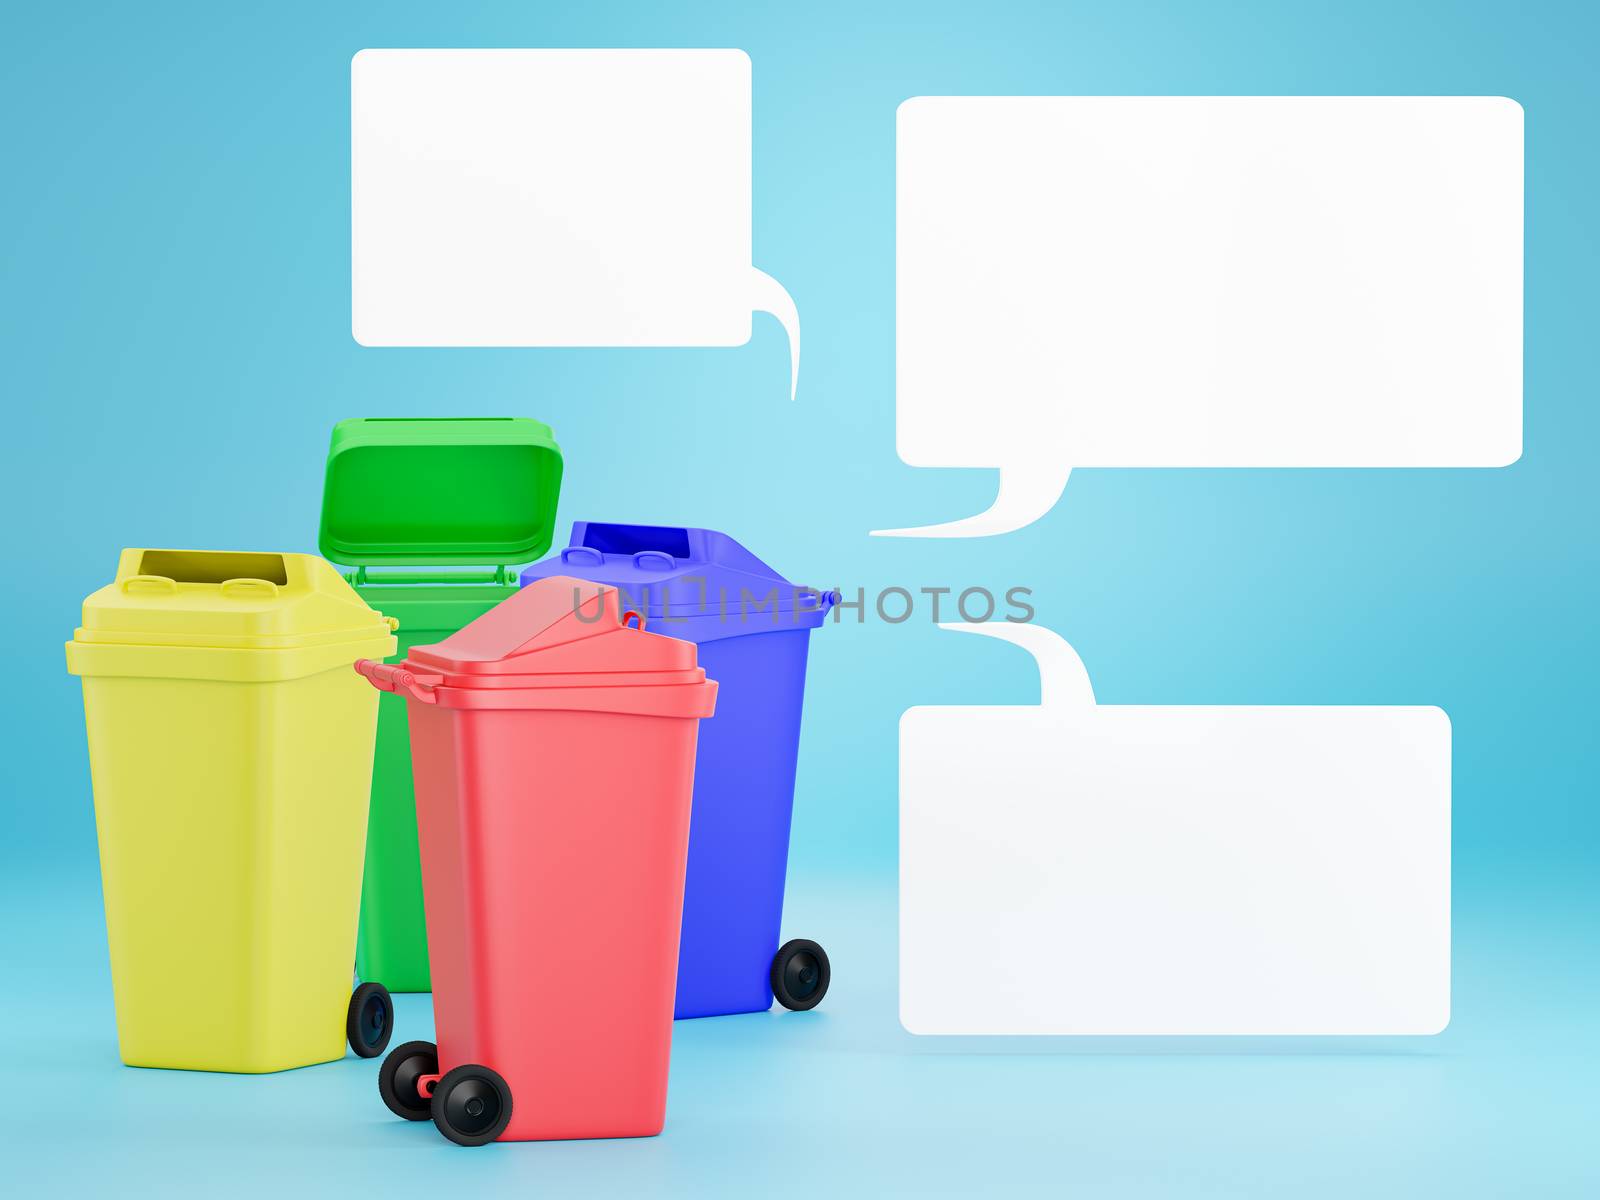 Set of colored bins to separate each type of waste for easier recycling. Realistic trash can of various colors and blank text boxes. Concept of saving the world by properly littering. 3D rendering.